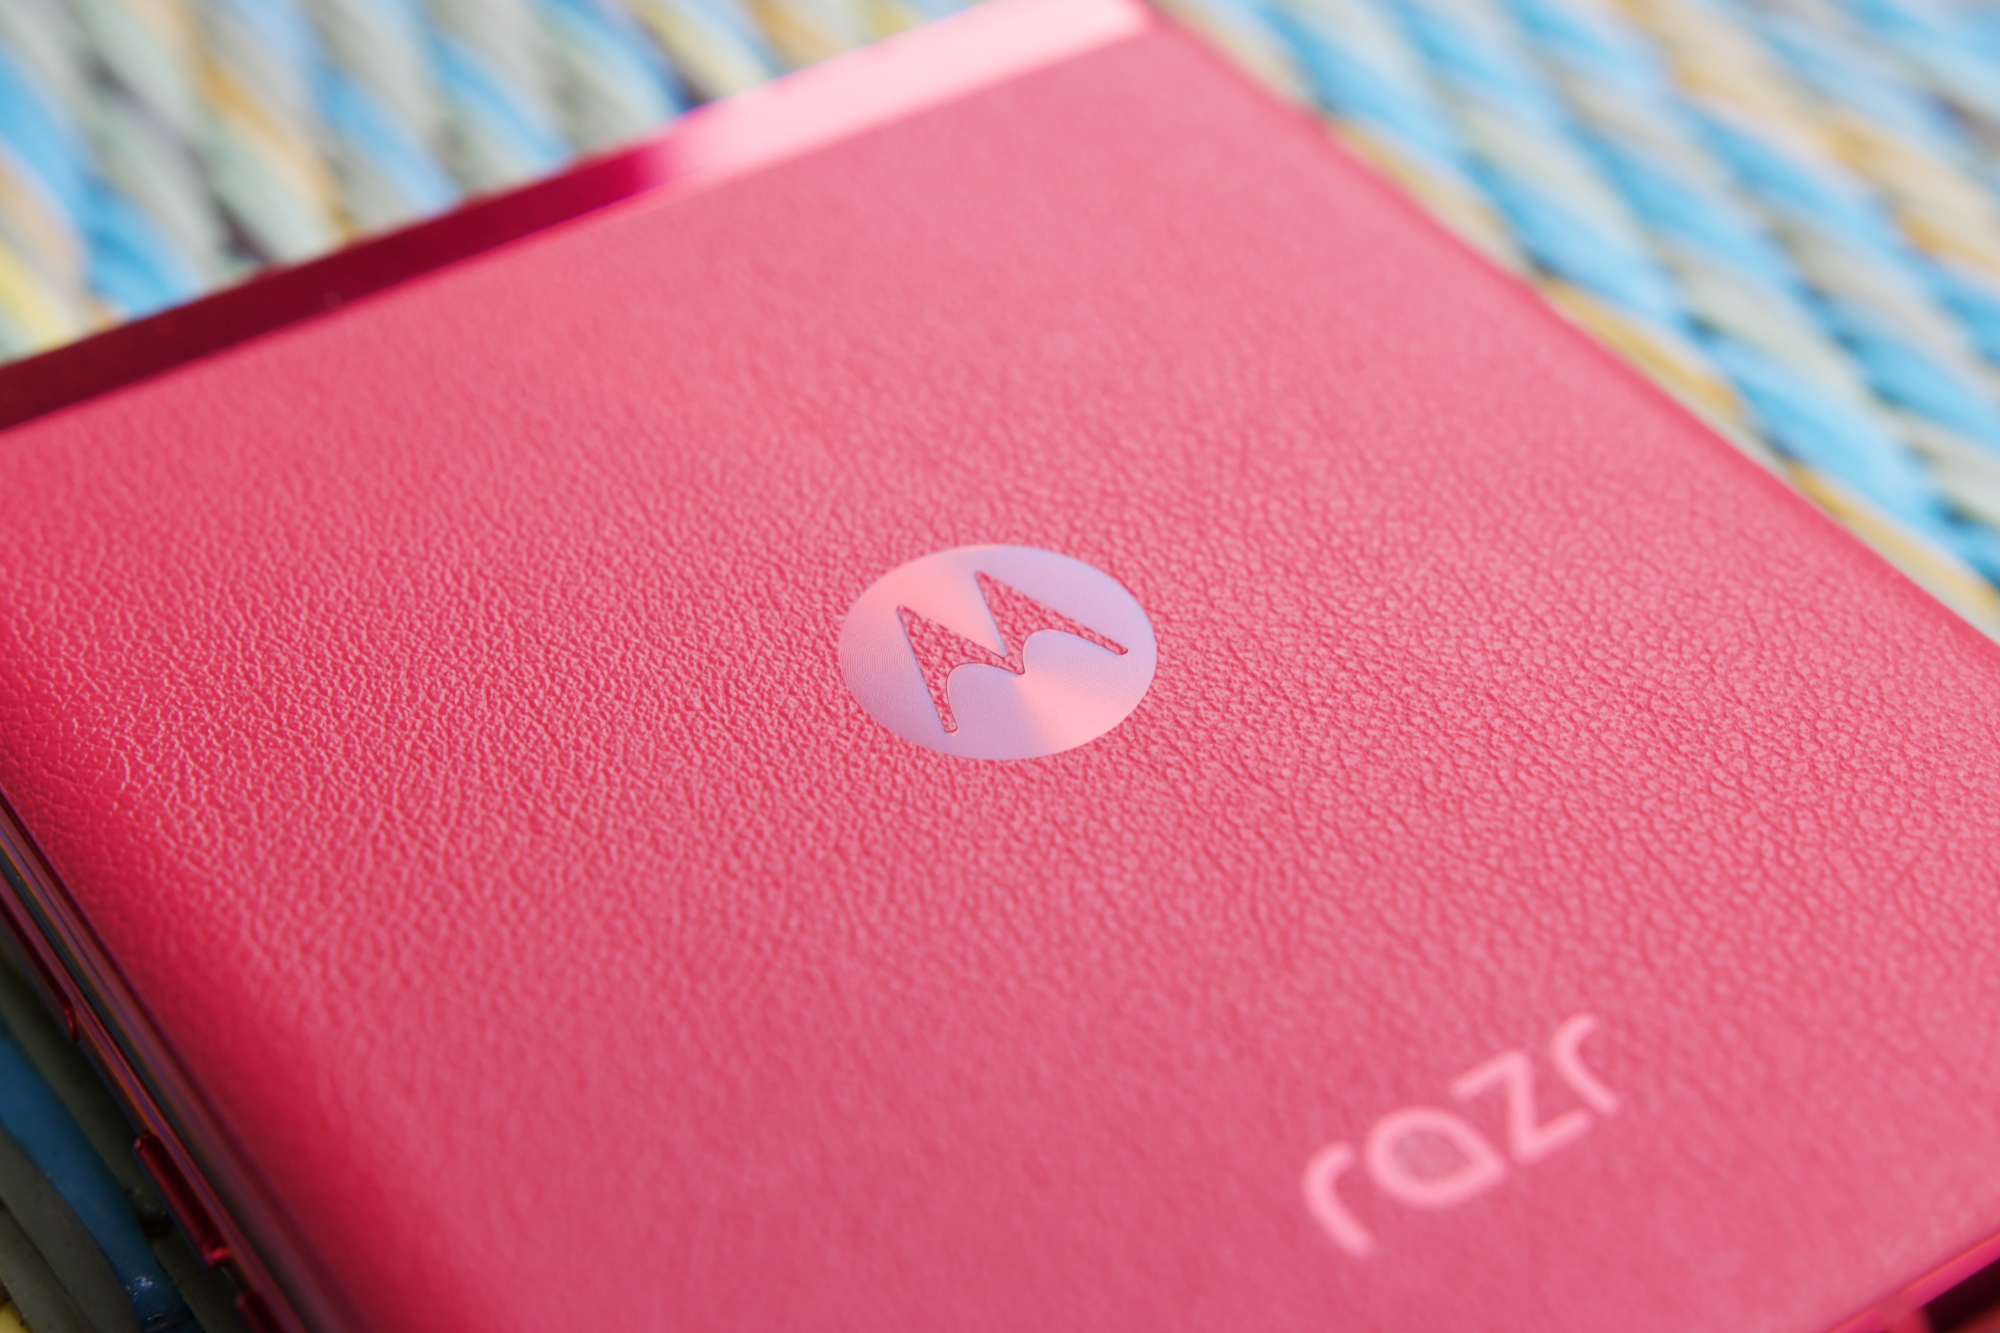 Motorola Razr Plus review: the folding phone I've been waiting for